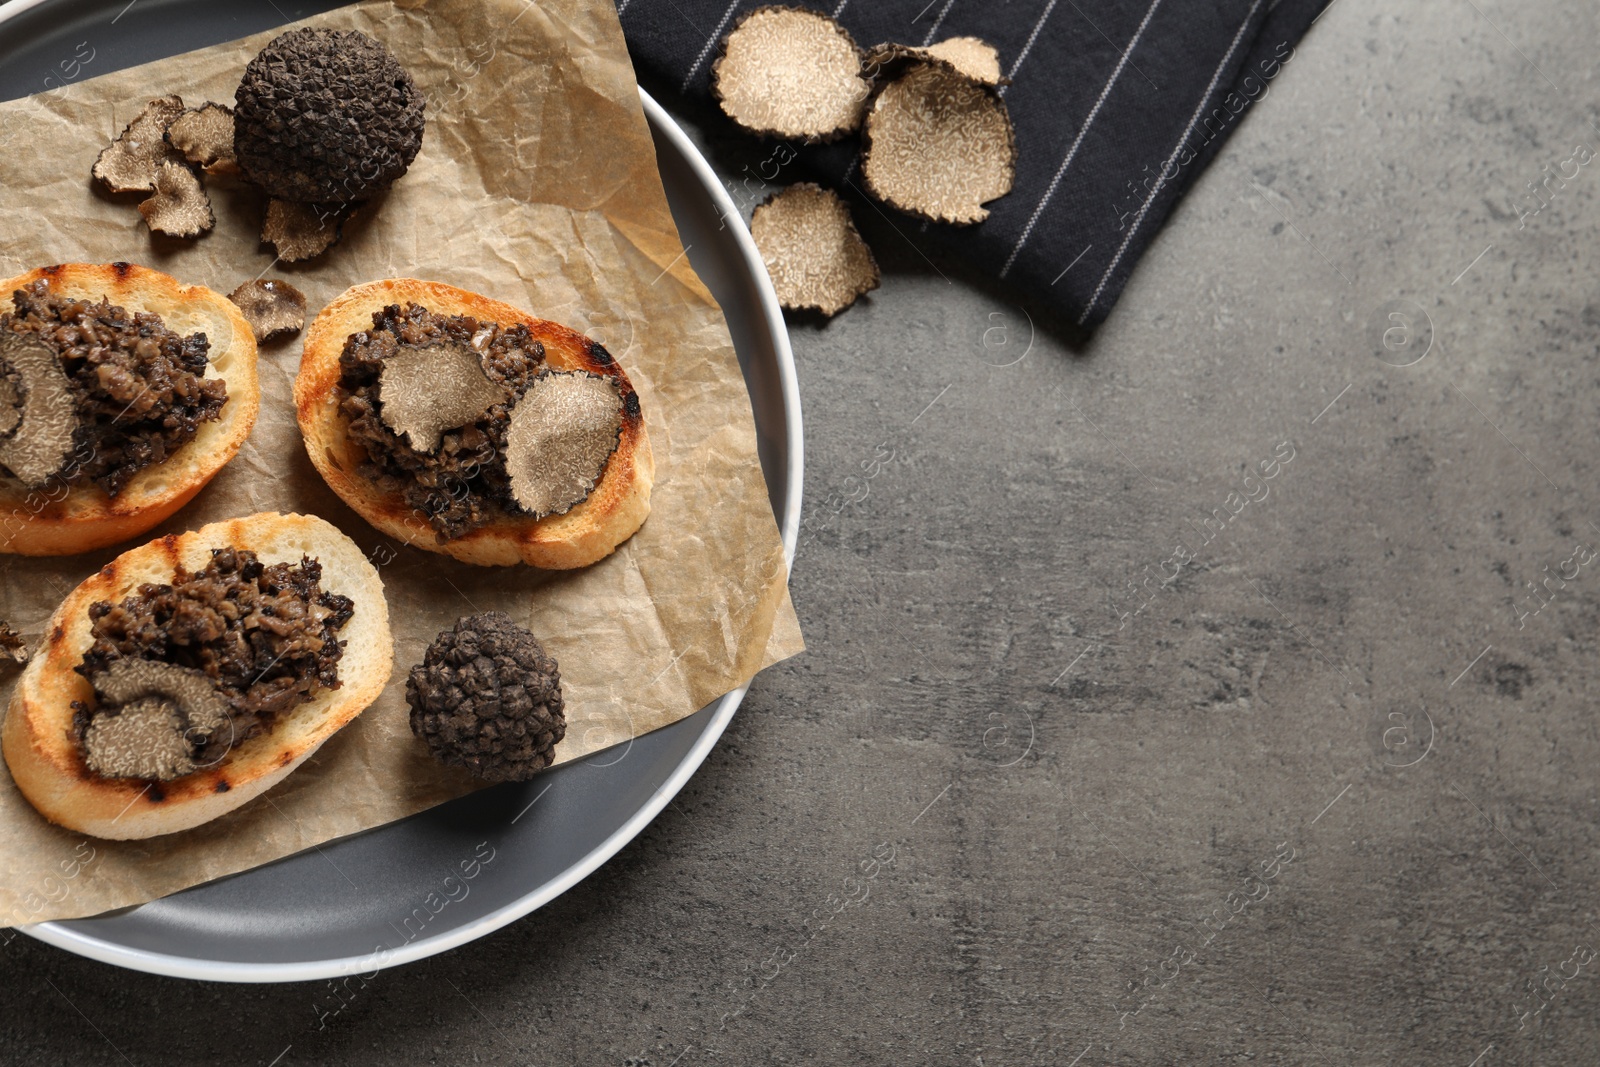 Photo of Delicious bruschettas with truffle sauce on grey table, flat lay. Space for text